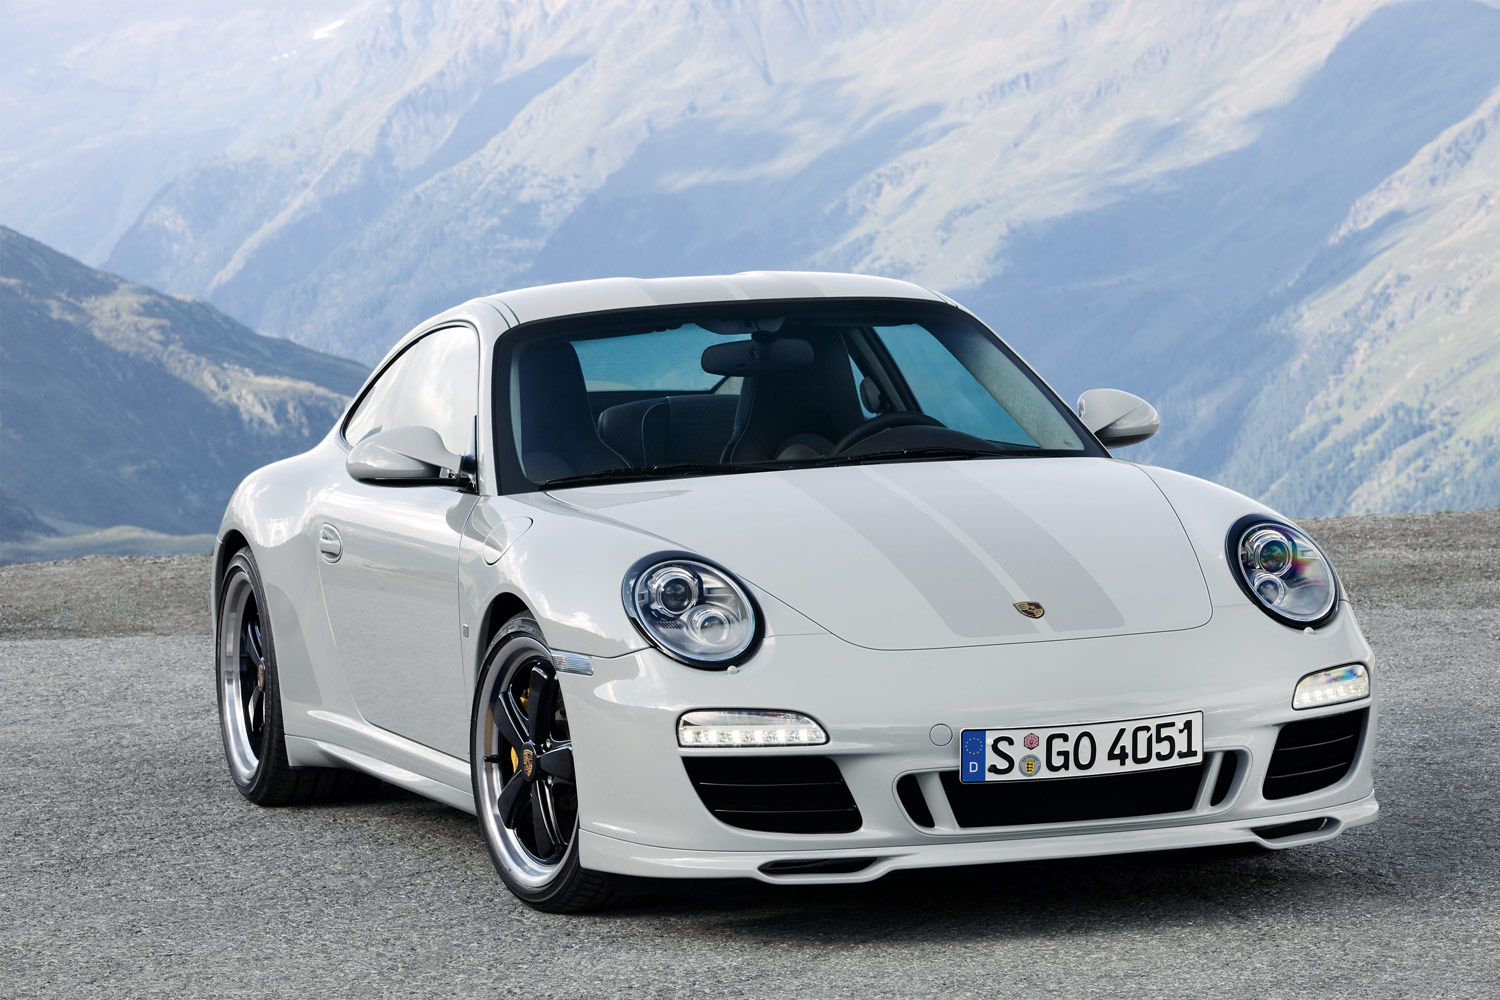 2009 Porsche 911 Sport Classic in the mountains